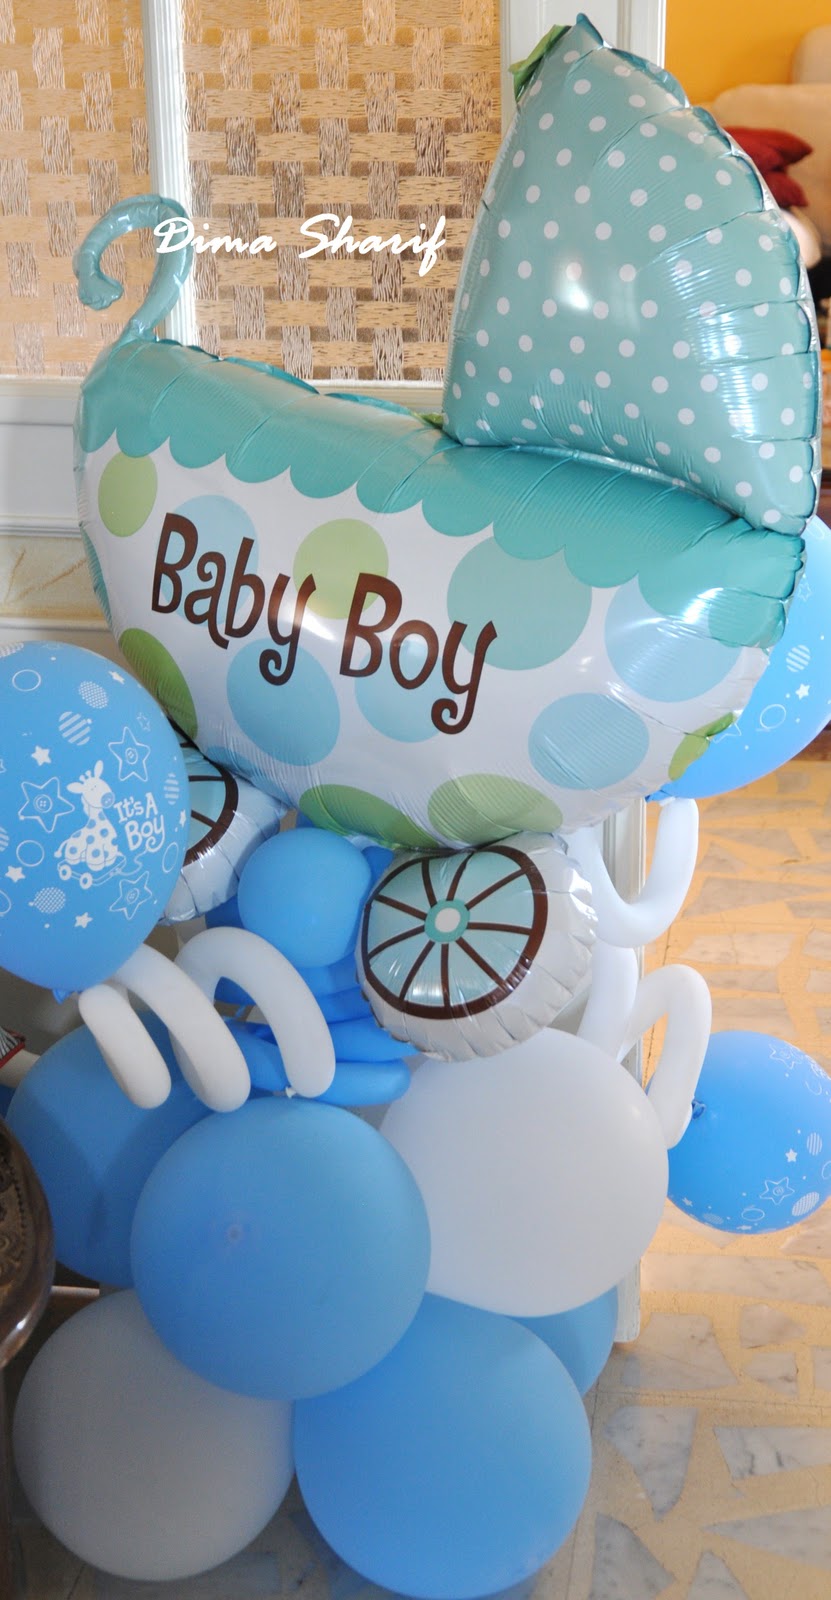 DIMA SHARIF: Baby Showers DIY inspirations & The Simplest and 